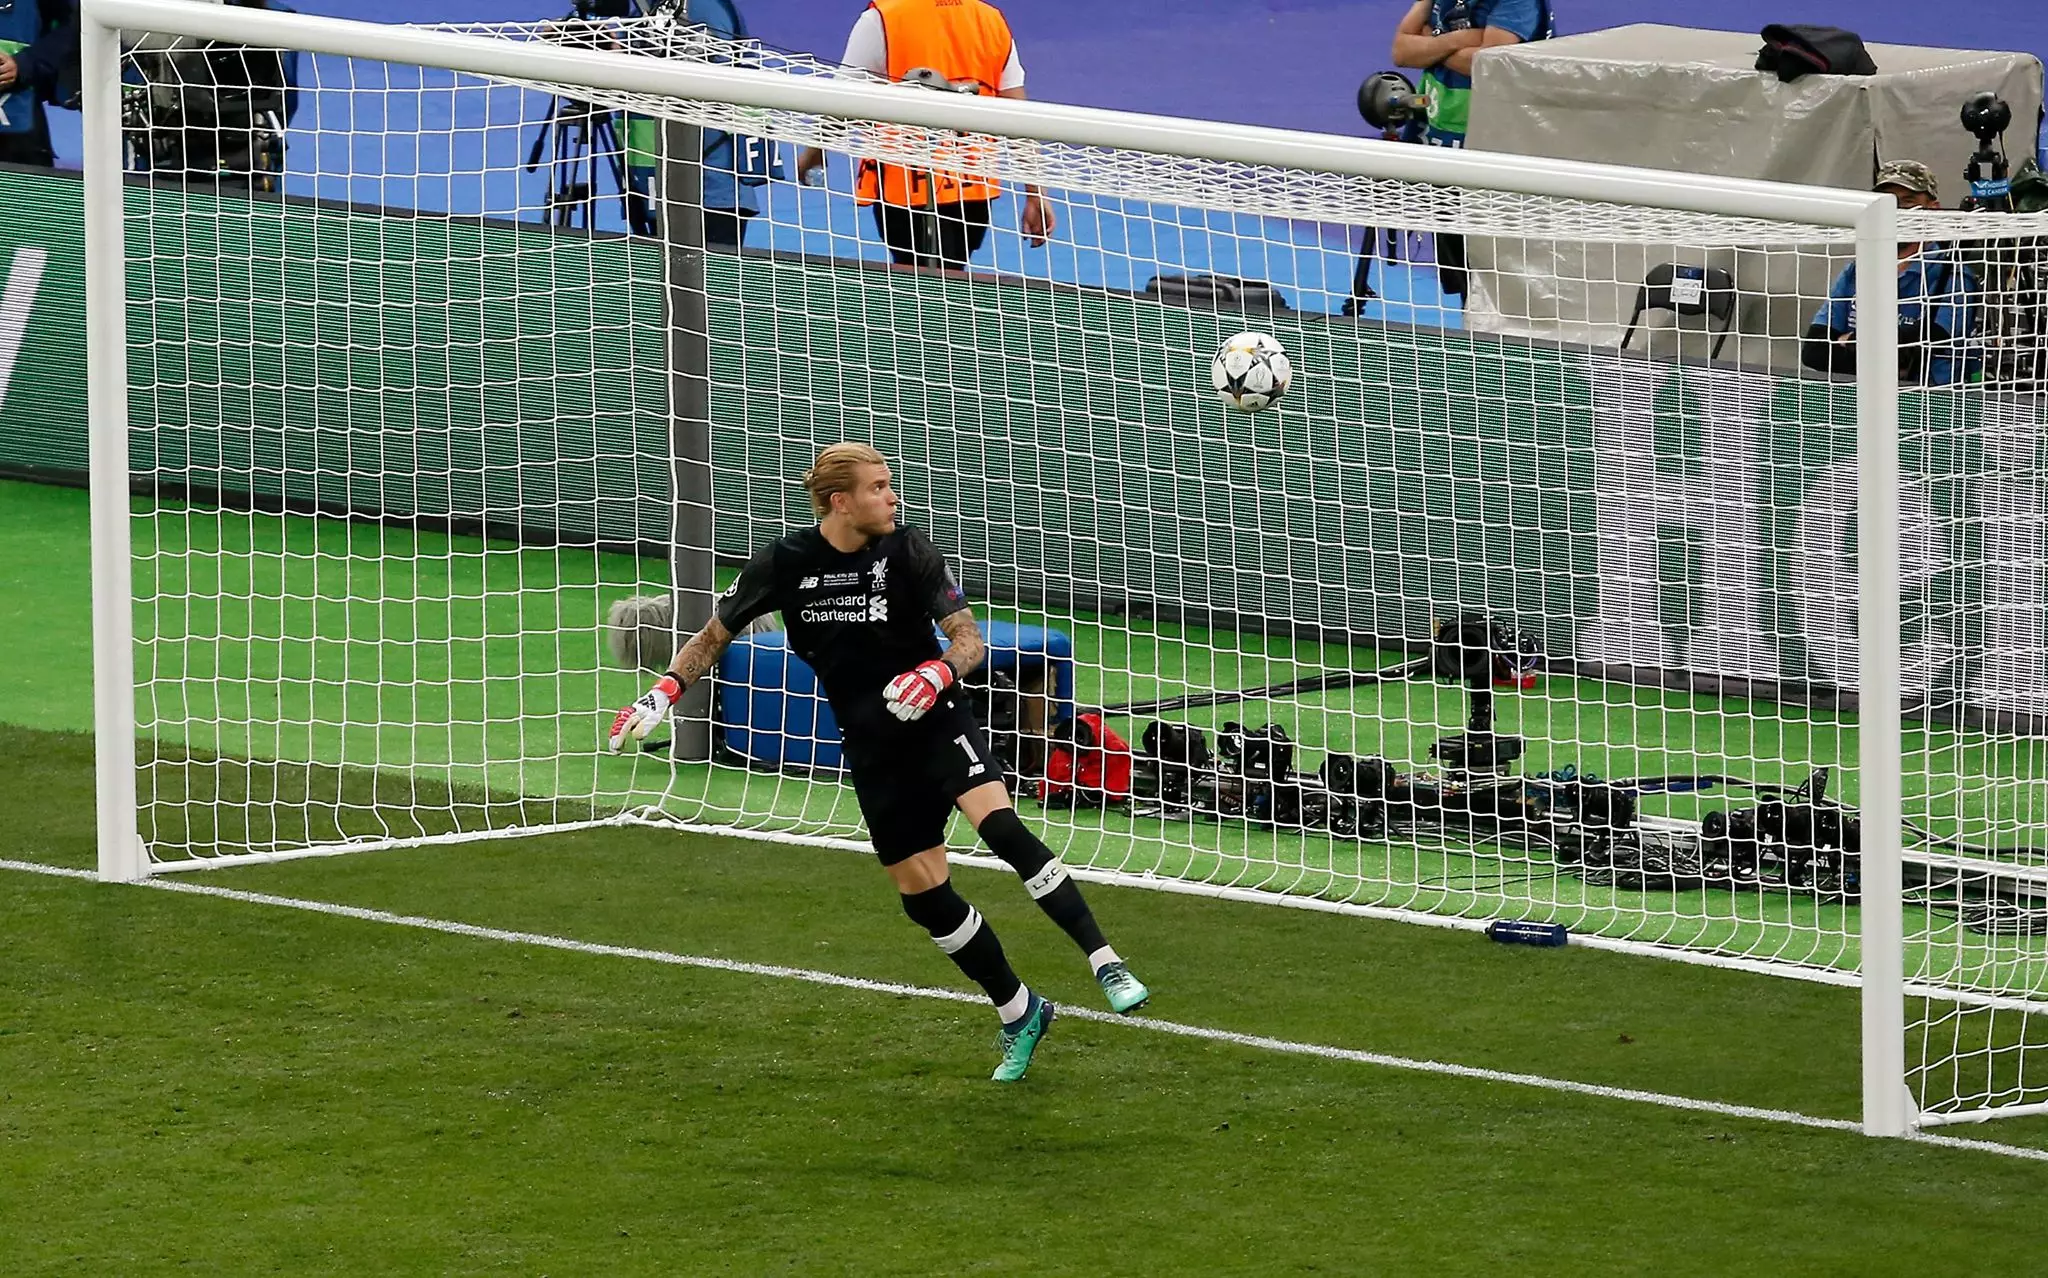 Karius painfully looks at the ball after his Champions League mistake. Image: PA